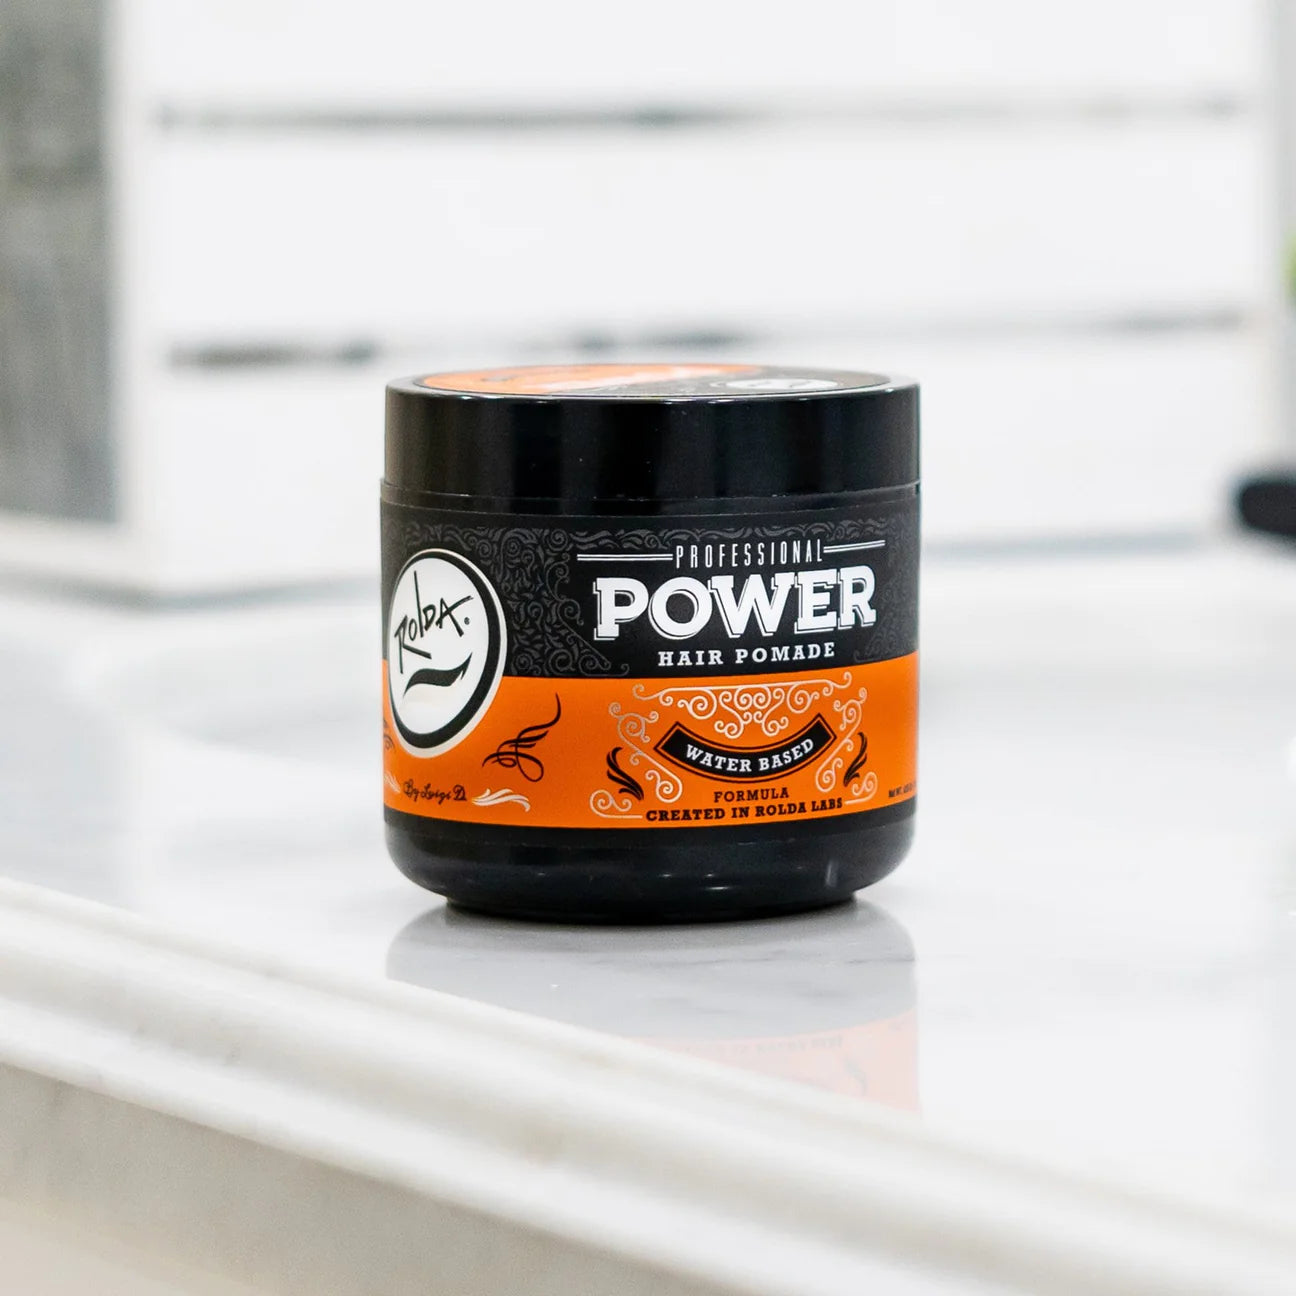 ROLDA PROFESSIONAL POWER HAIR POMADE WATER BASED 115g